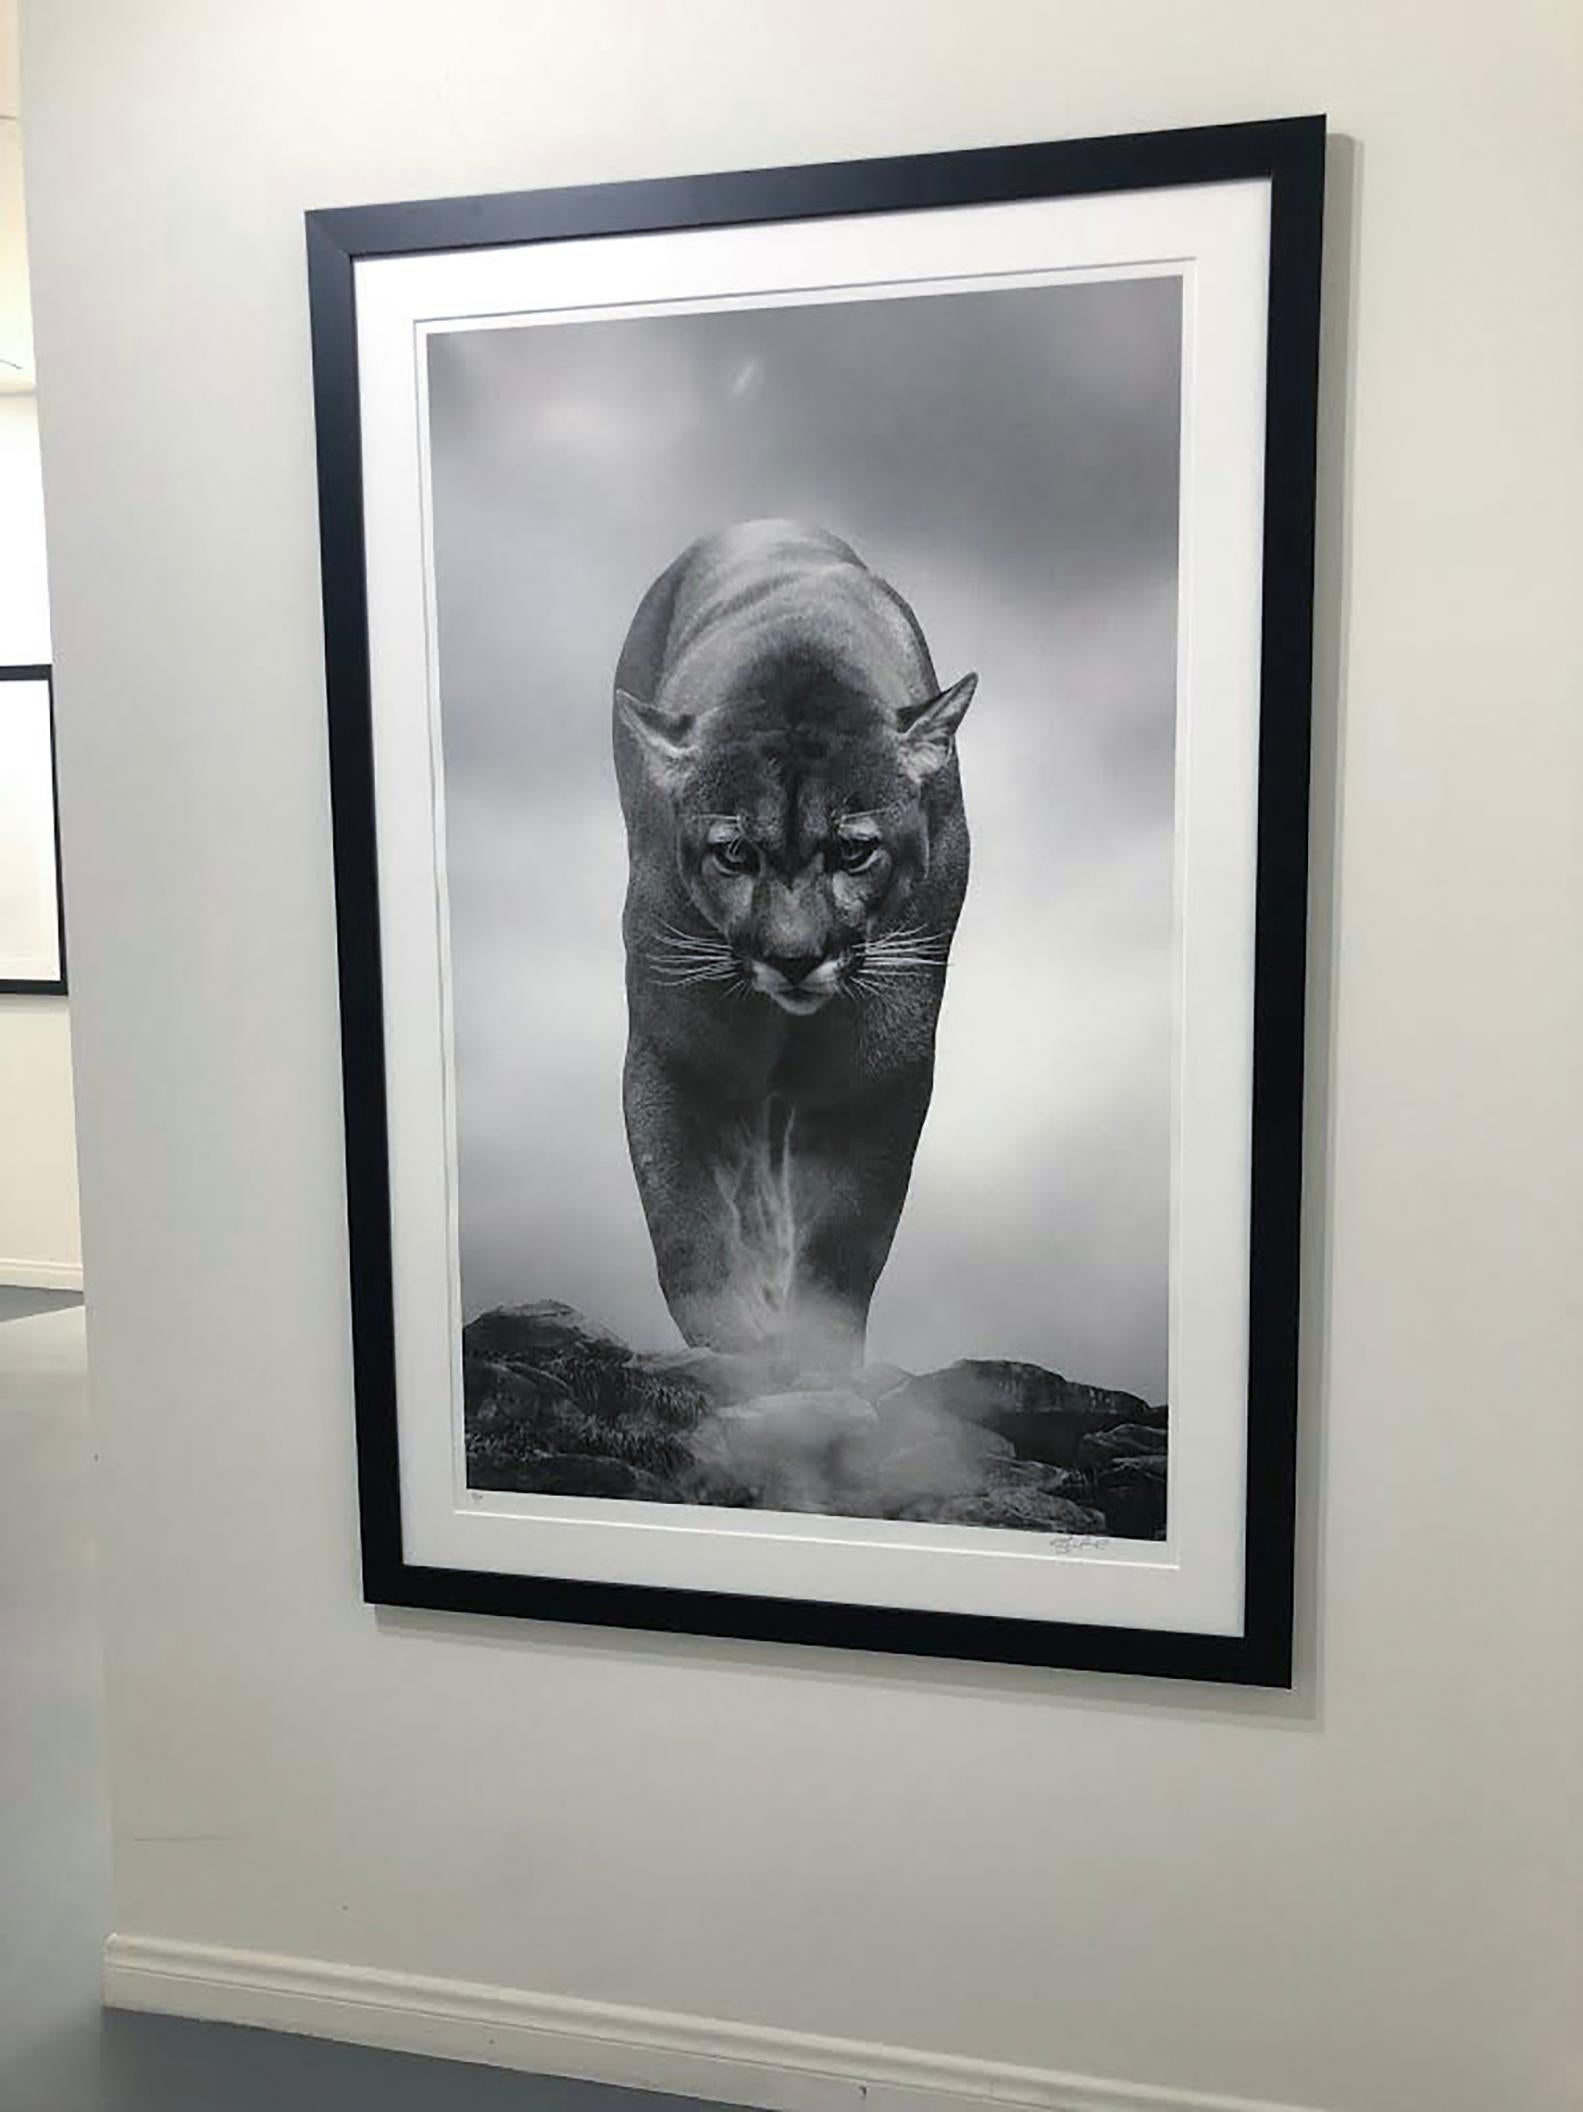  36x48 Black and White Photography, Cougar Photograph, Mountain Lion Art 4